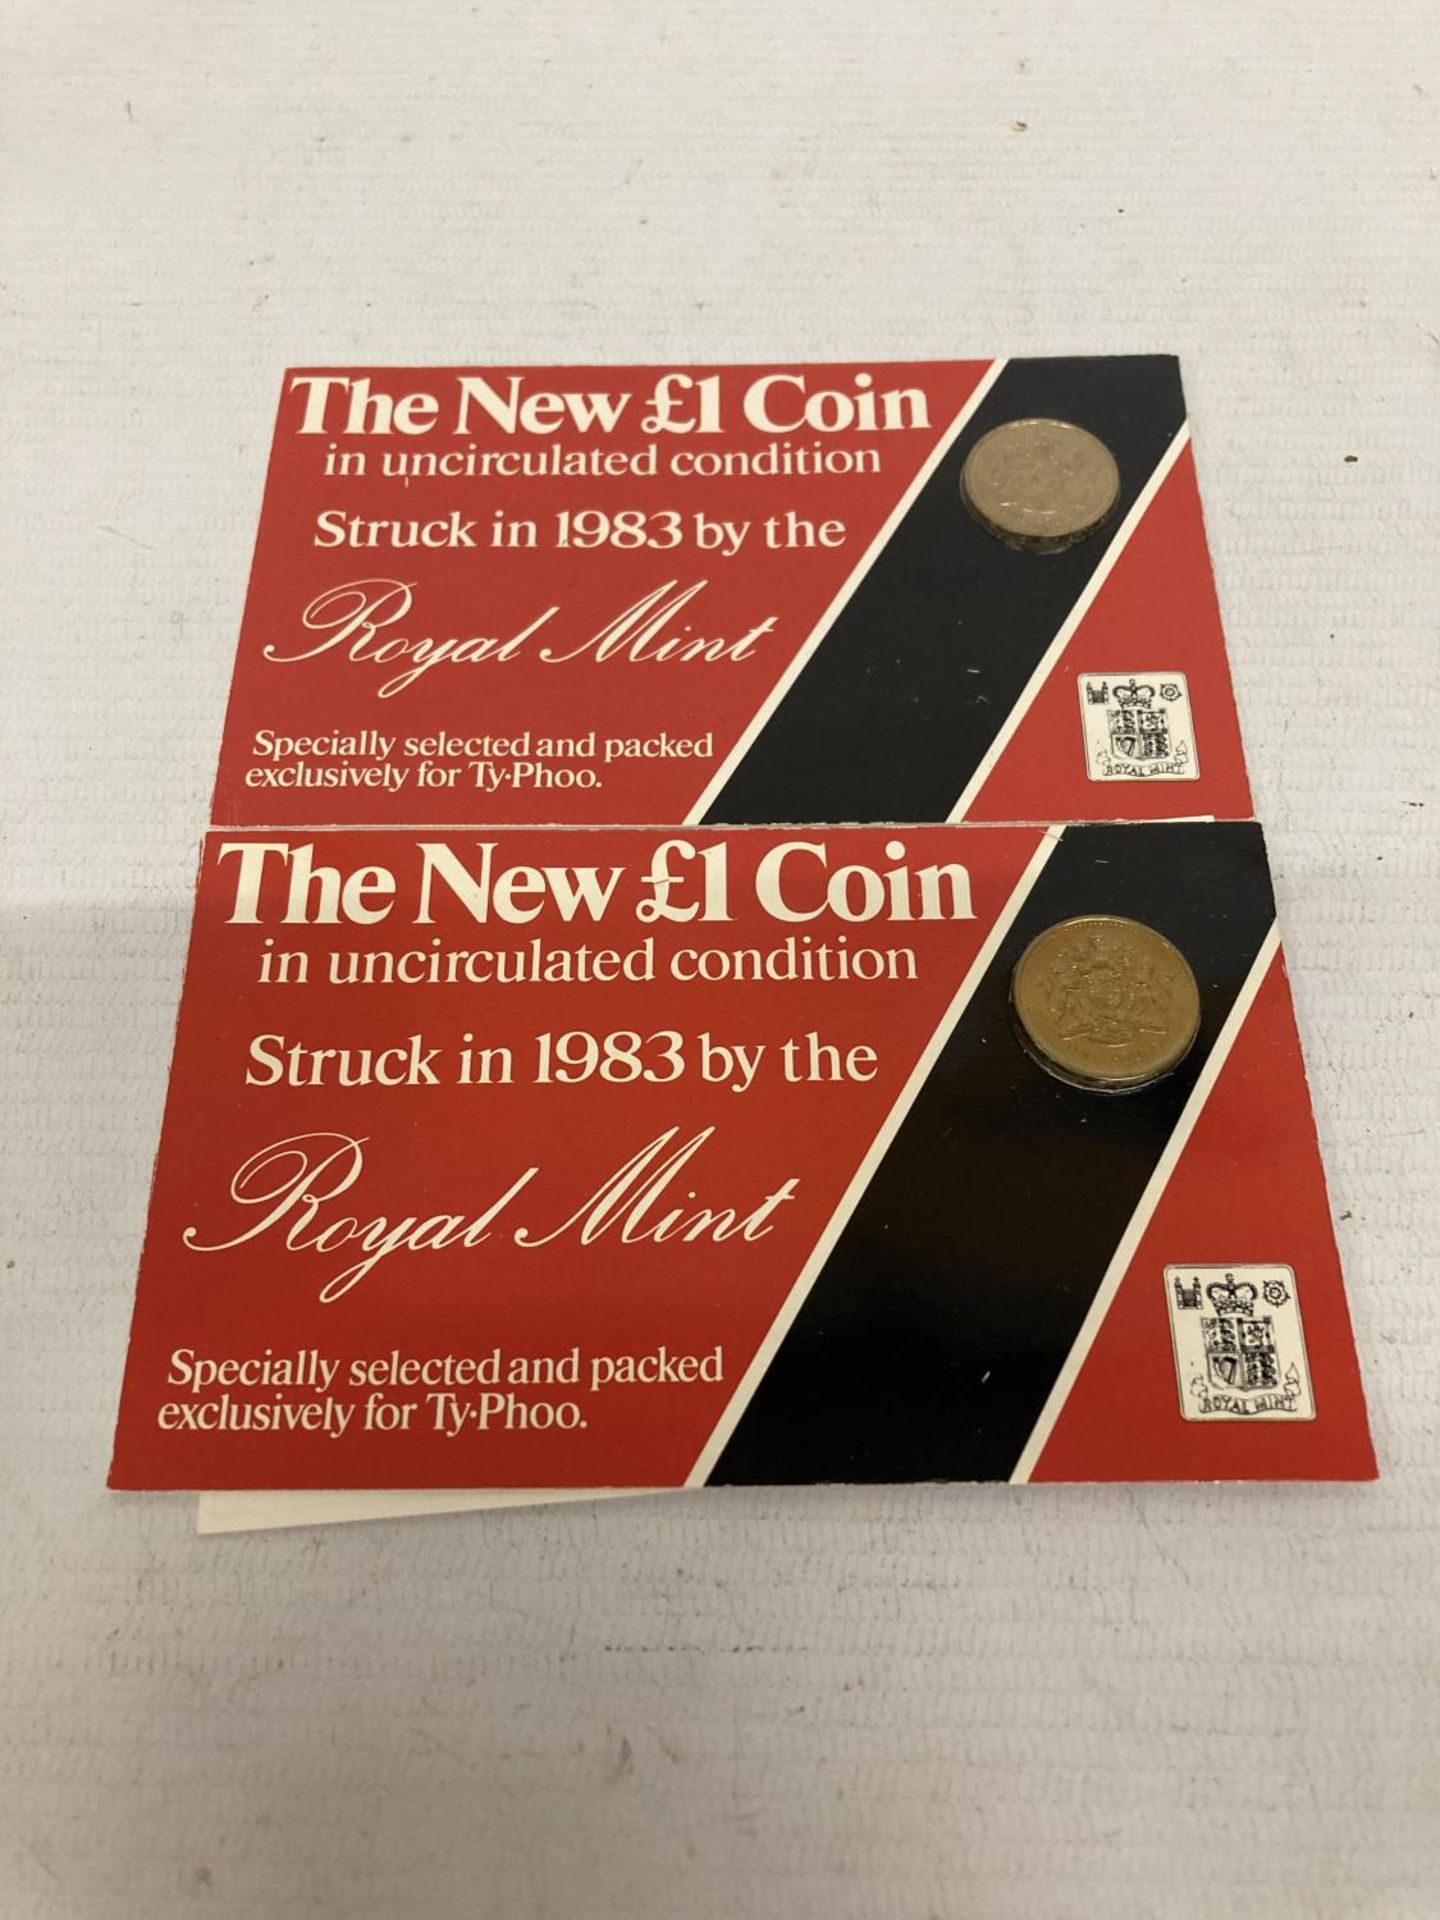 TWO NEW ONE POUND COINS IN UNCIRCULATED CONDITION STRUCK IN 1993 BY THE ROYAL MINT SPECIALLY